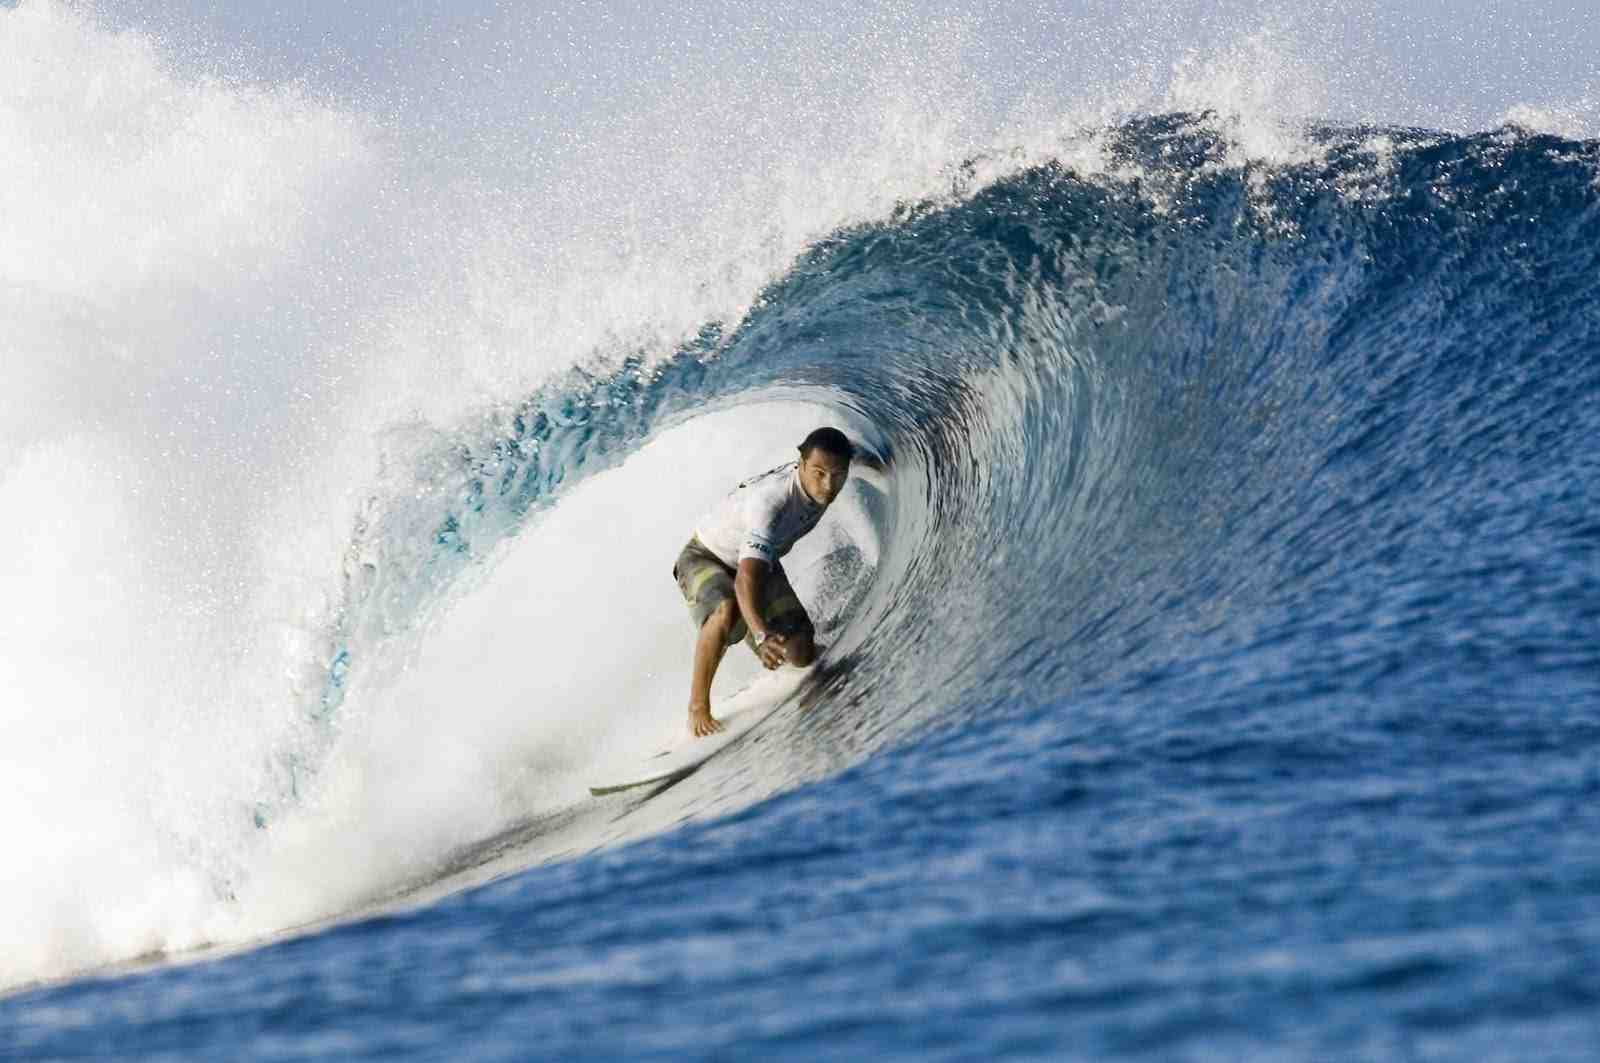 Is running good for surfing?